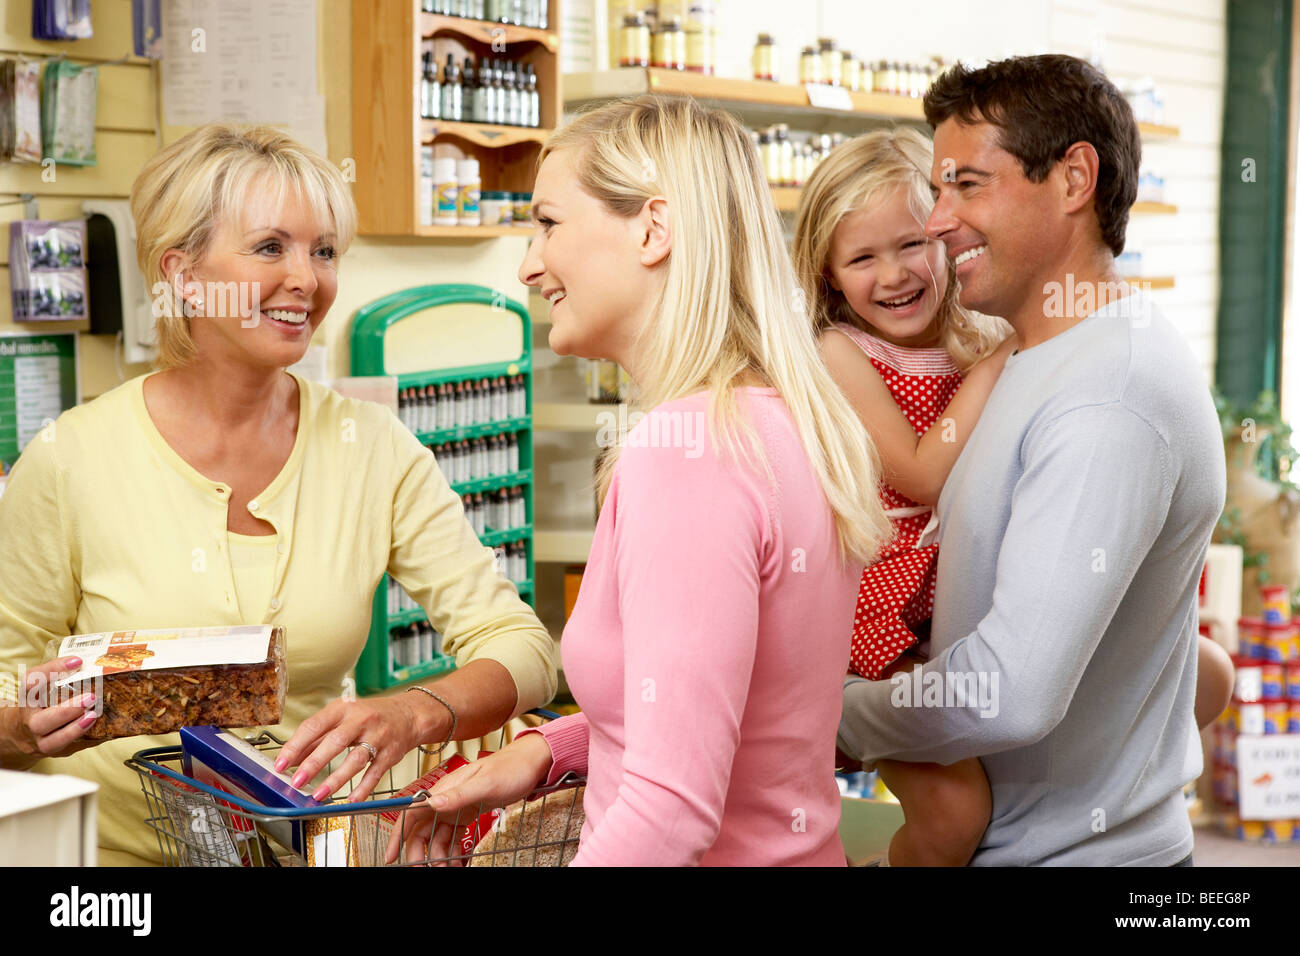 Female Sales assistant in health food store Banque D'Images